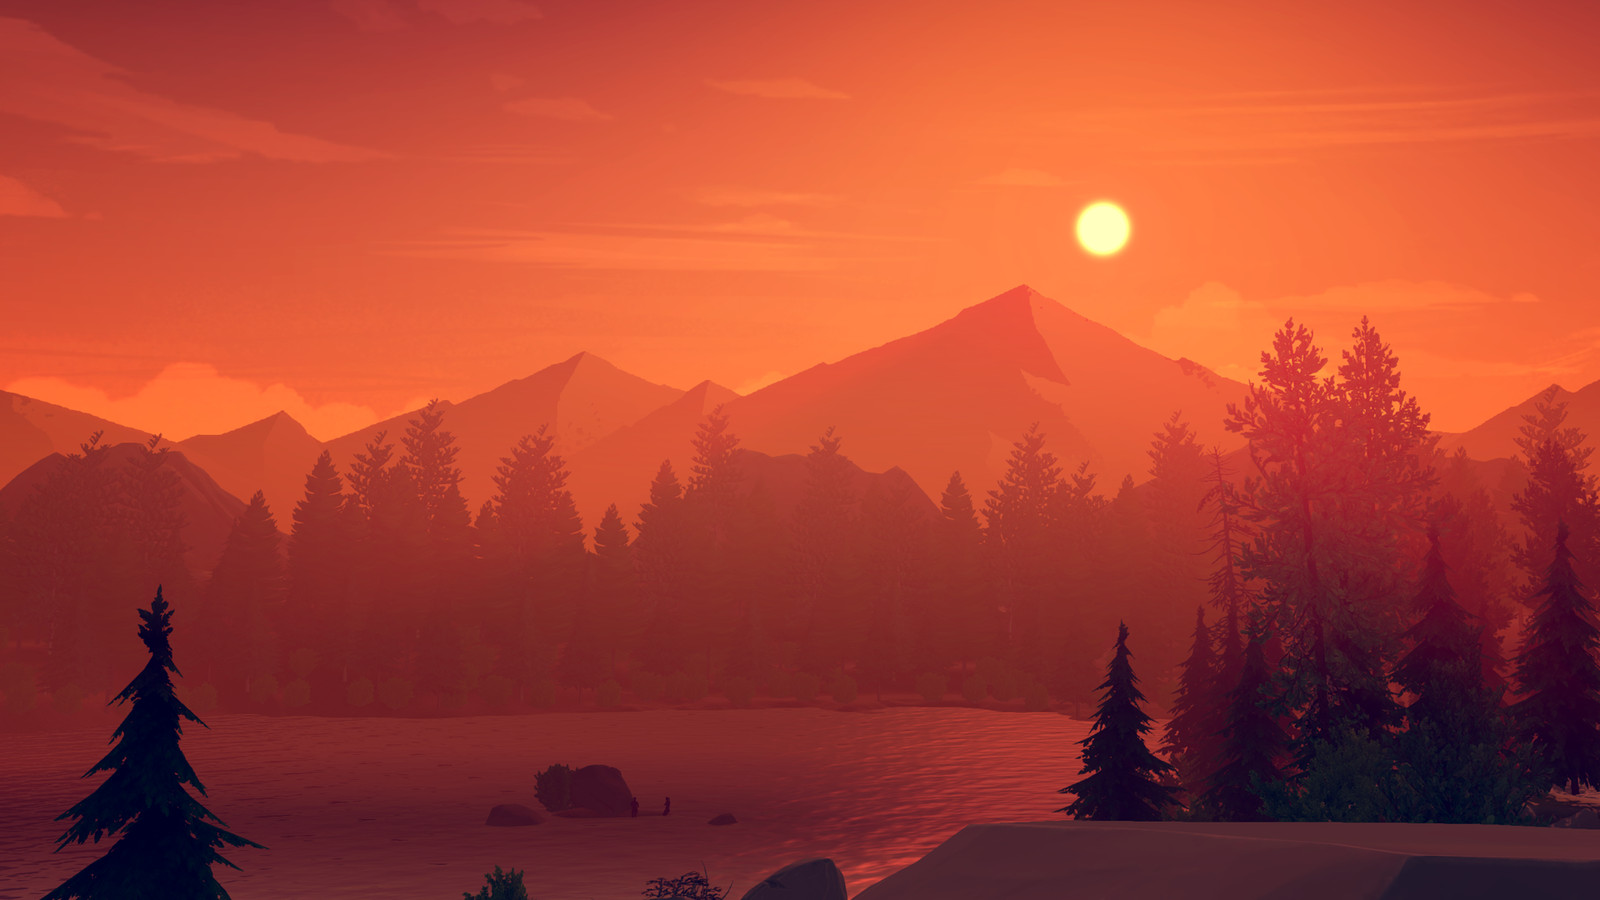 Firewatch review: a game that perfectly captures the beauty and terror